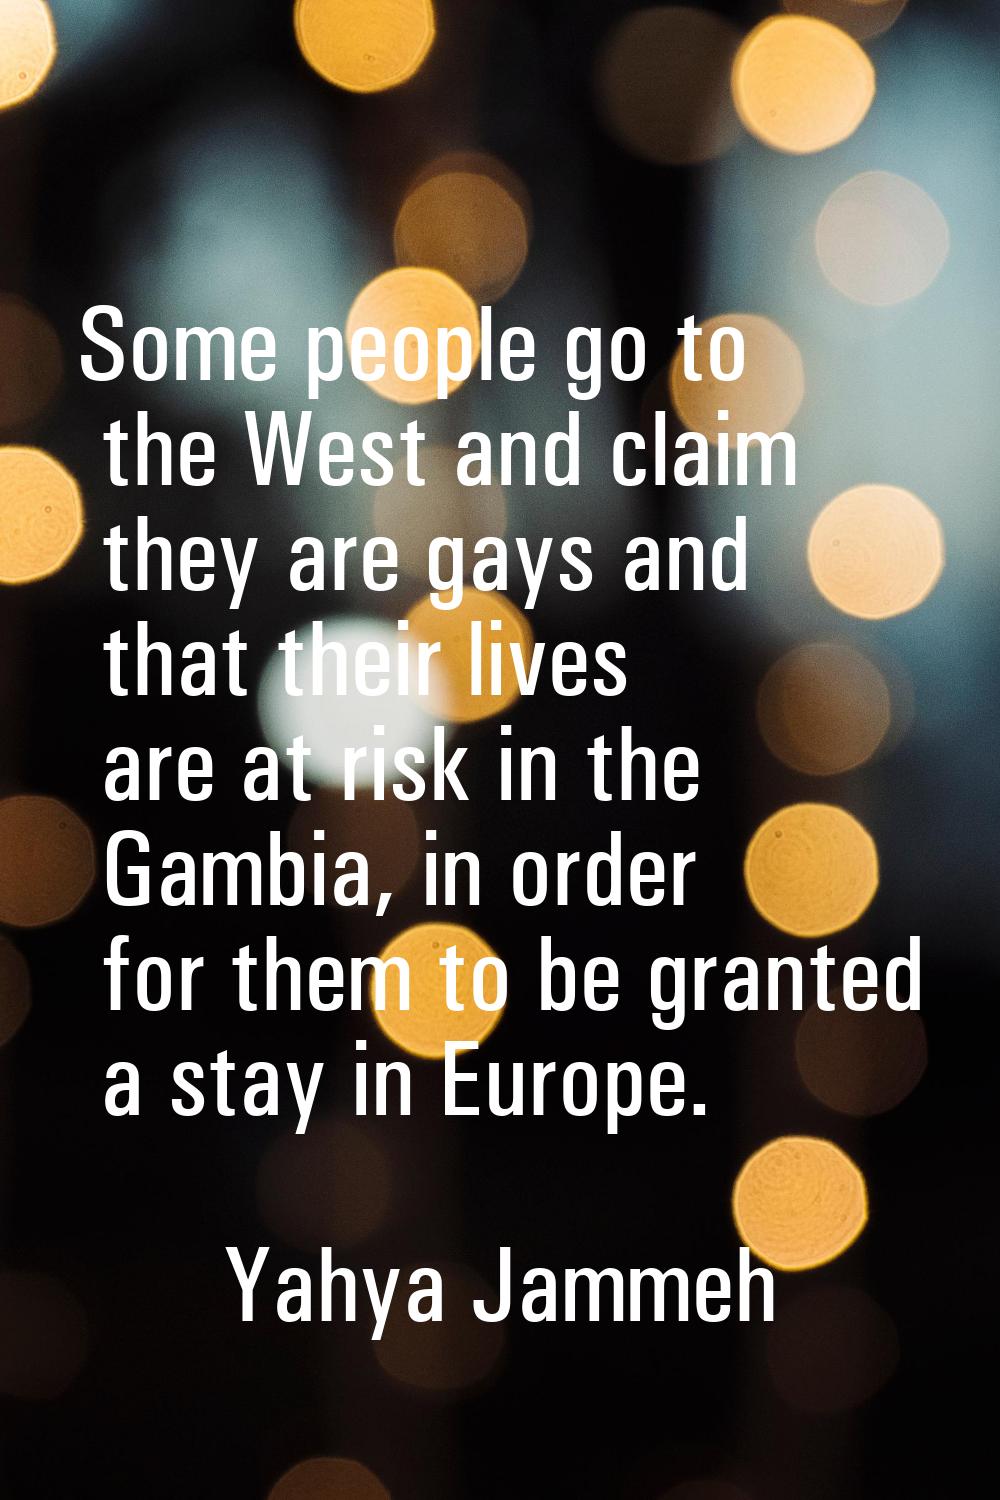 Some people go to the West and claim they are gays and that their lives are at risk in the Gambia, 